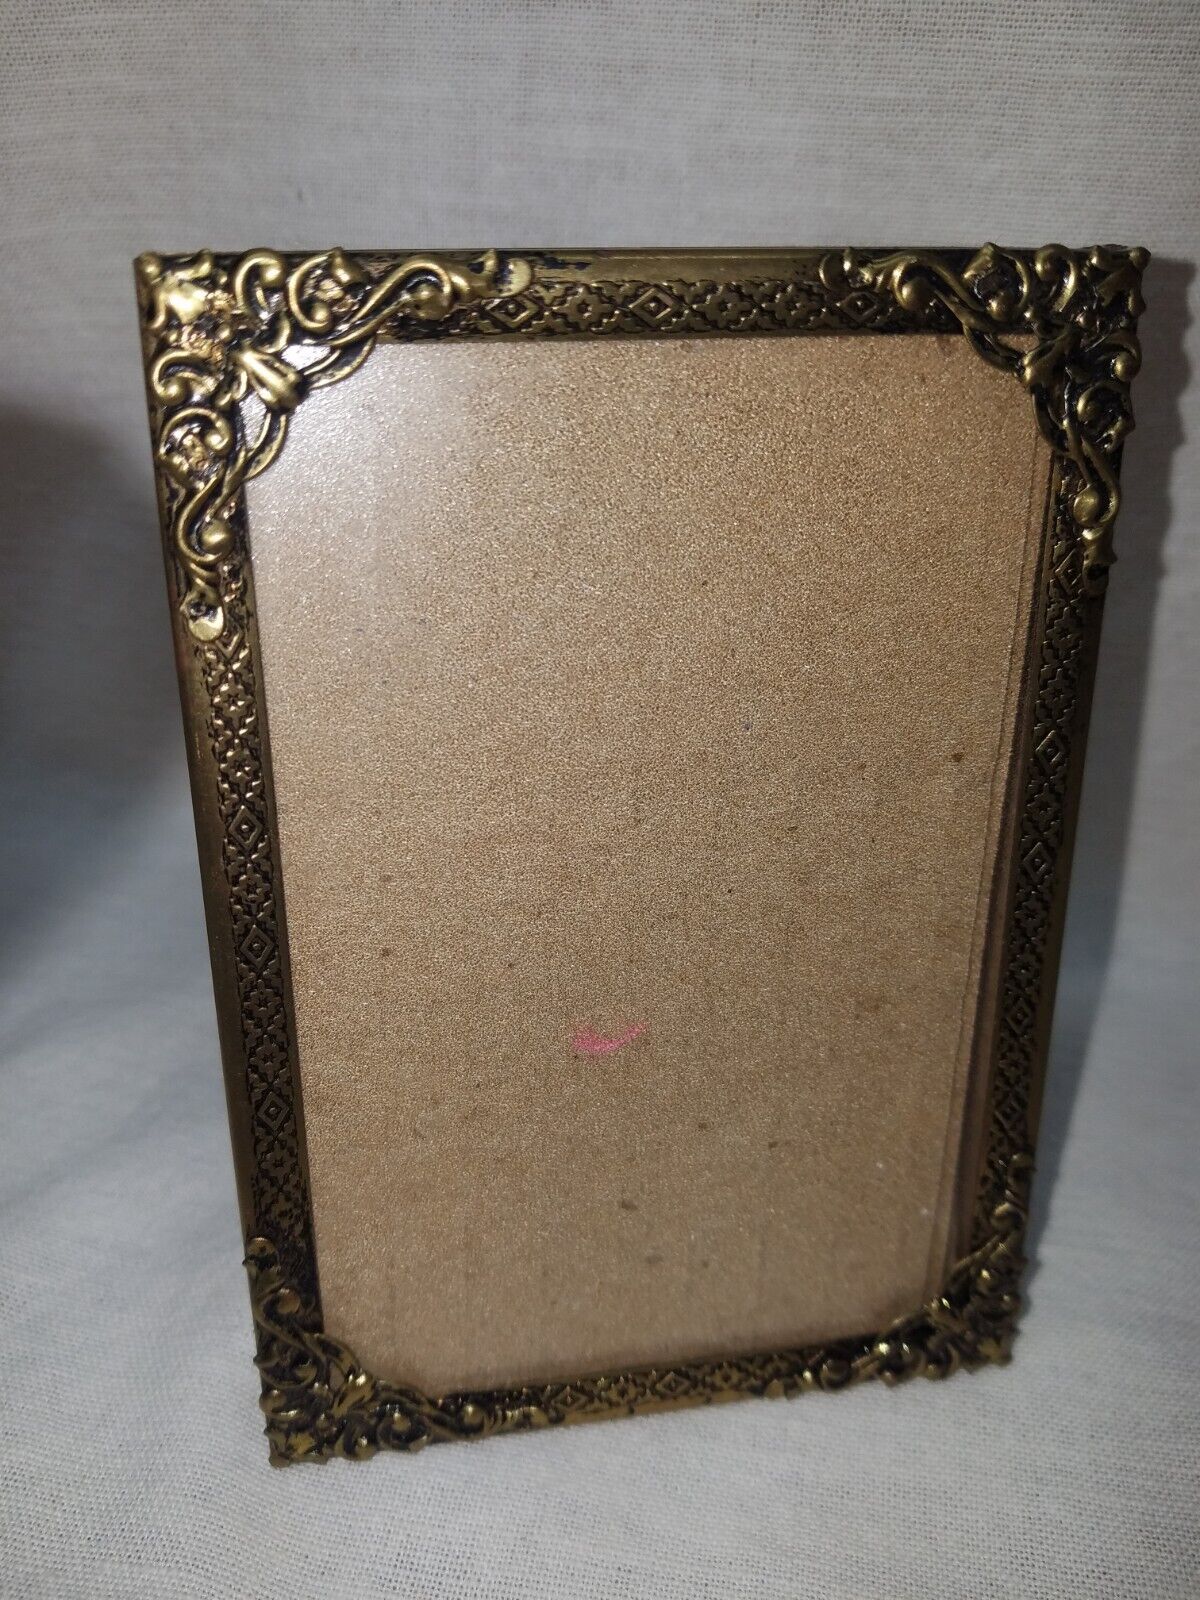 Vintage Ornate Brass 4 x 6 Table Picture Frame Great Details ABSOLUTELY GORGEOUS